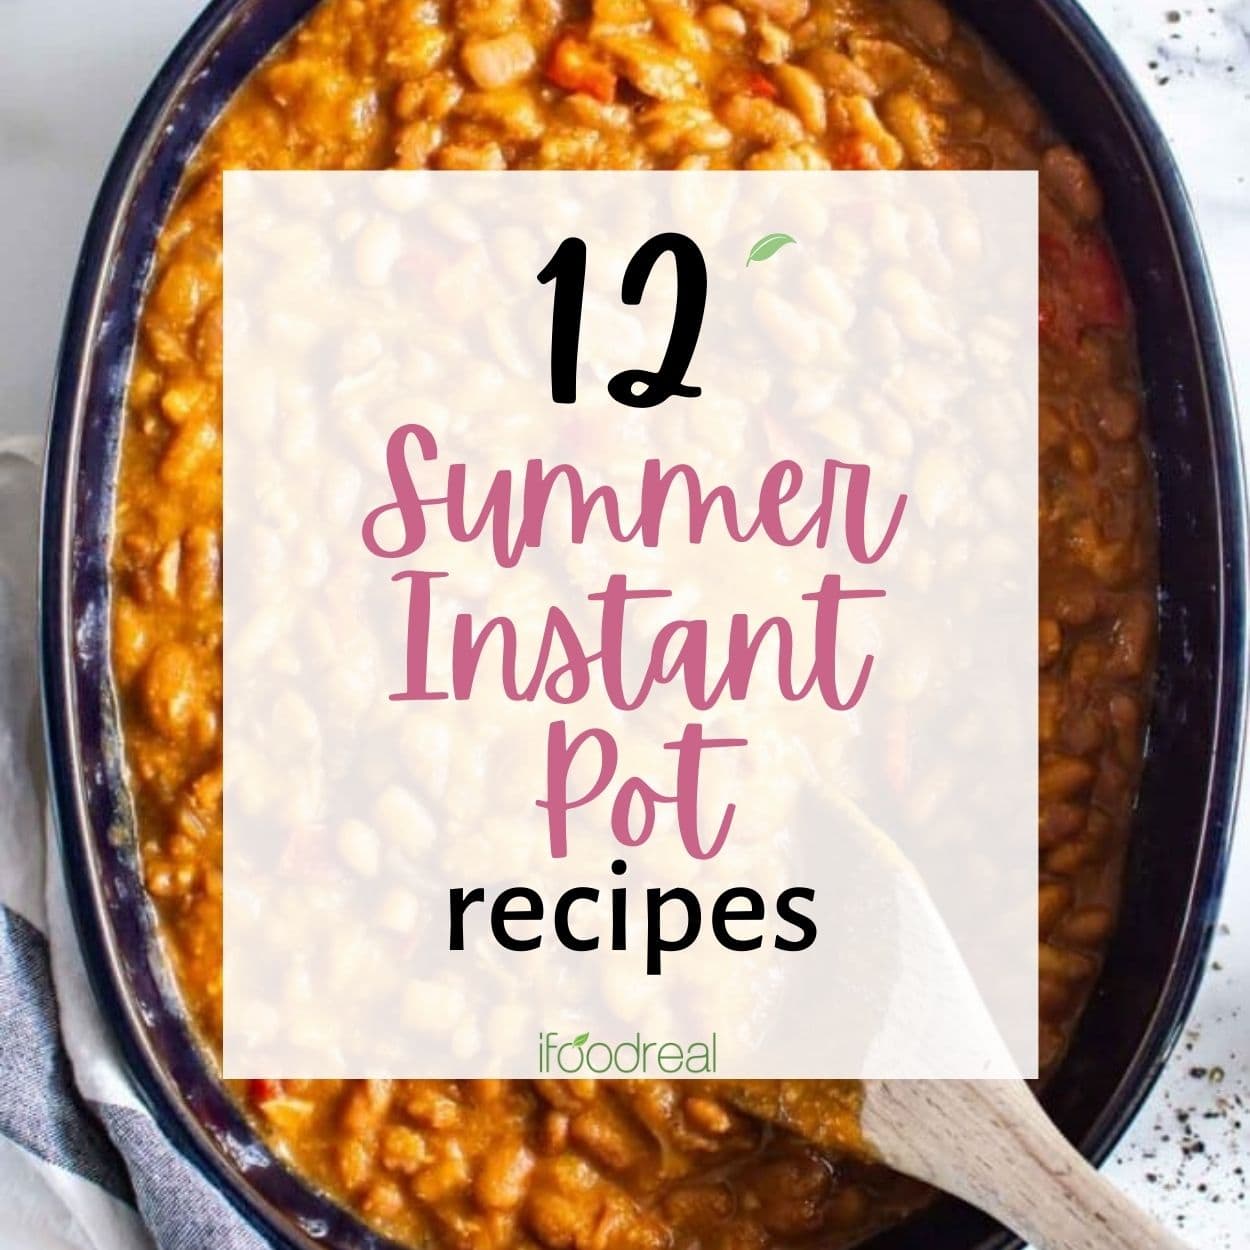 Summer Instant Pot recipes baked beans in serving dish with spoon.